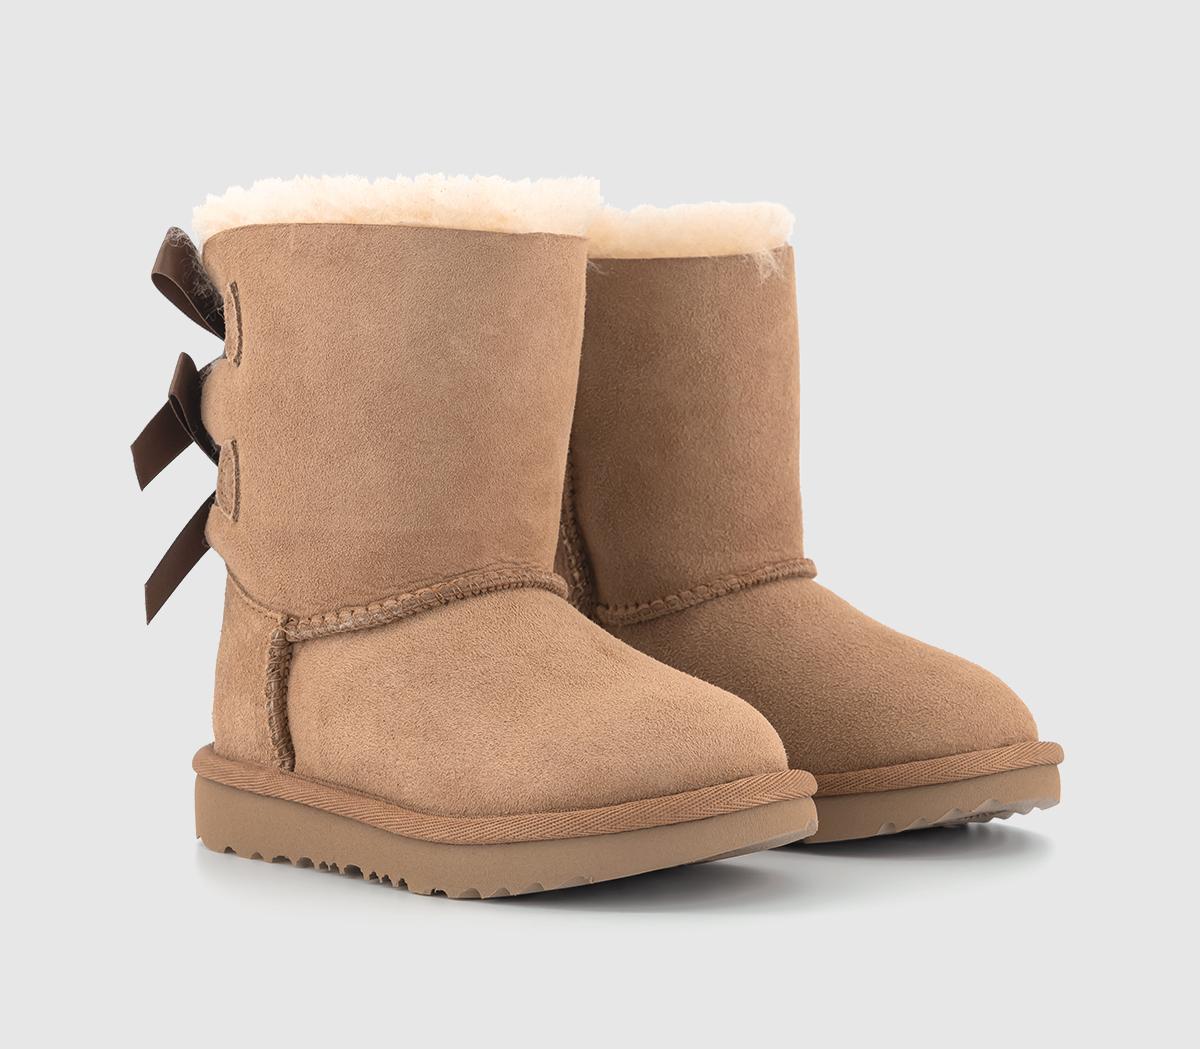 UGG Kids Toddler Bailey Bow Ii Boots Chestnut Tan, 6infant